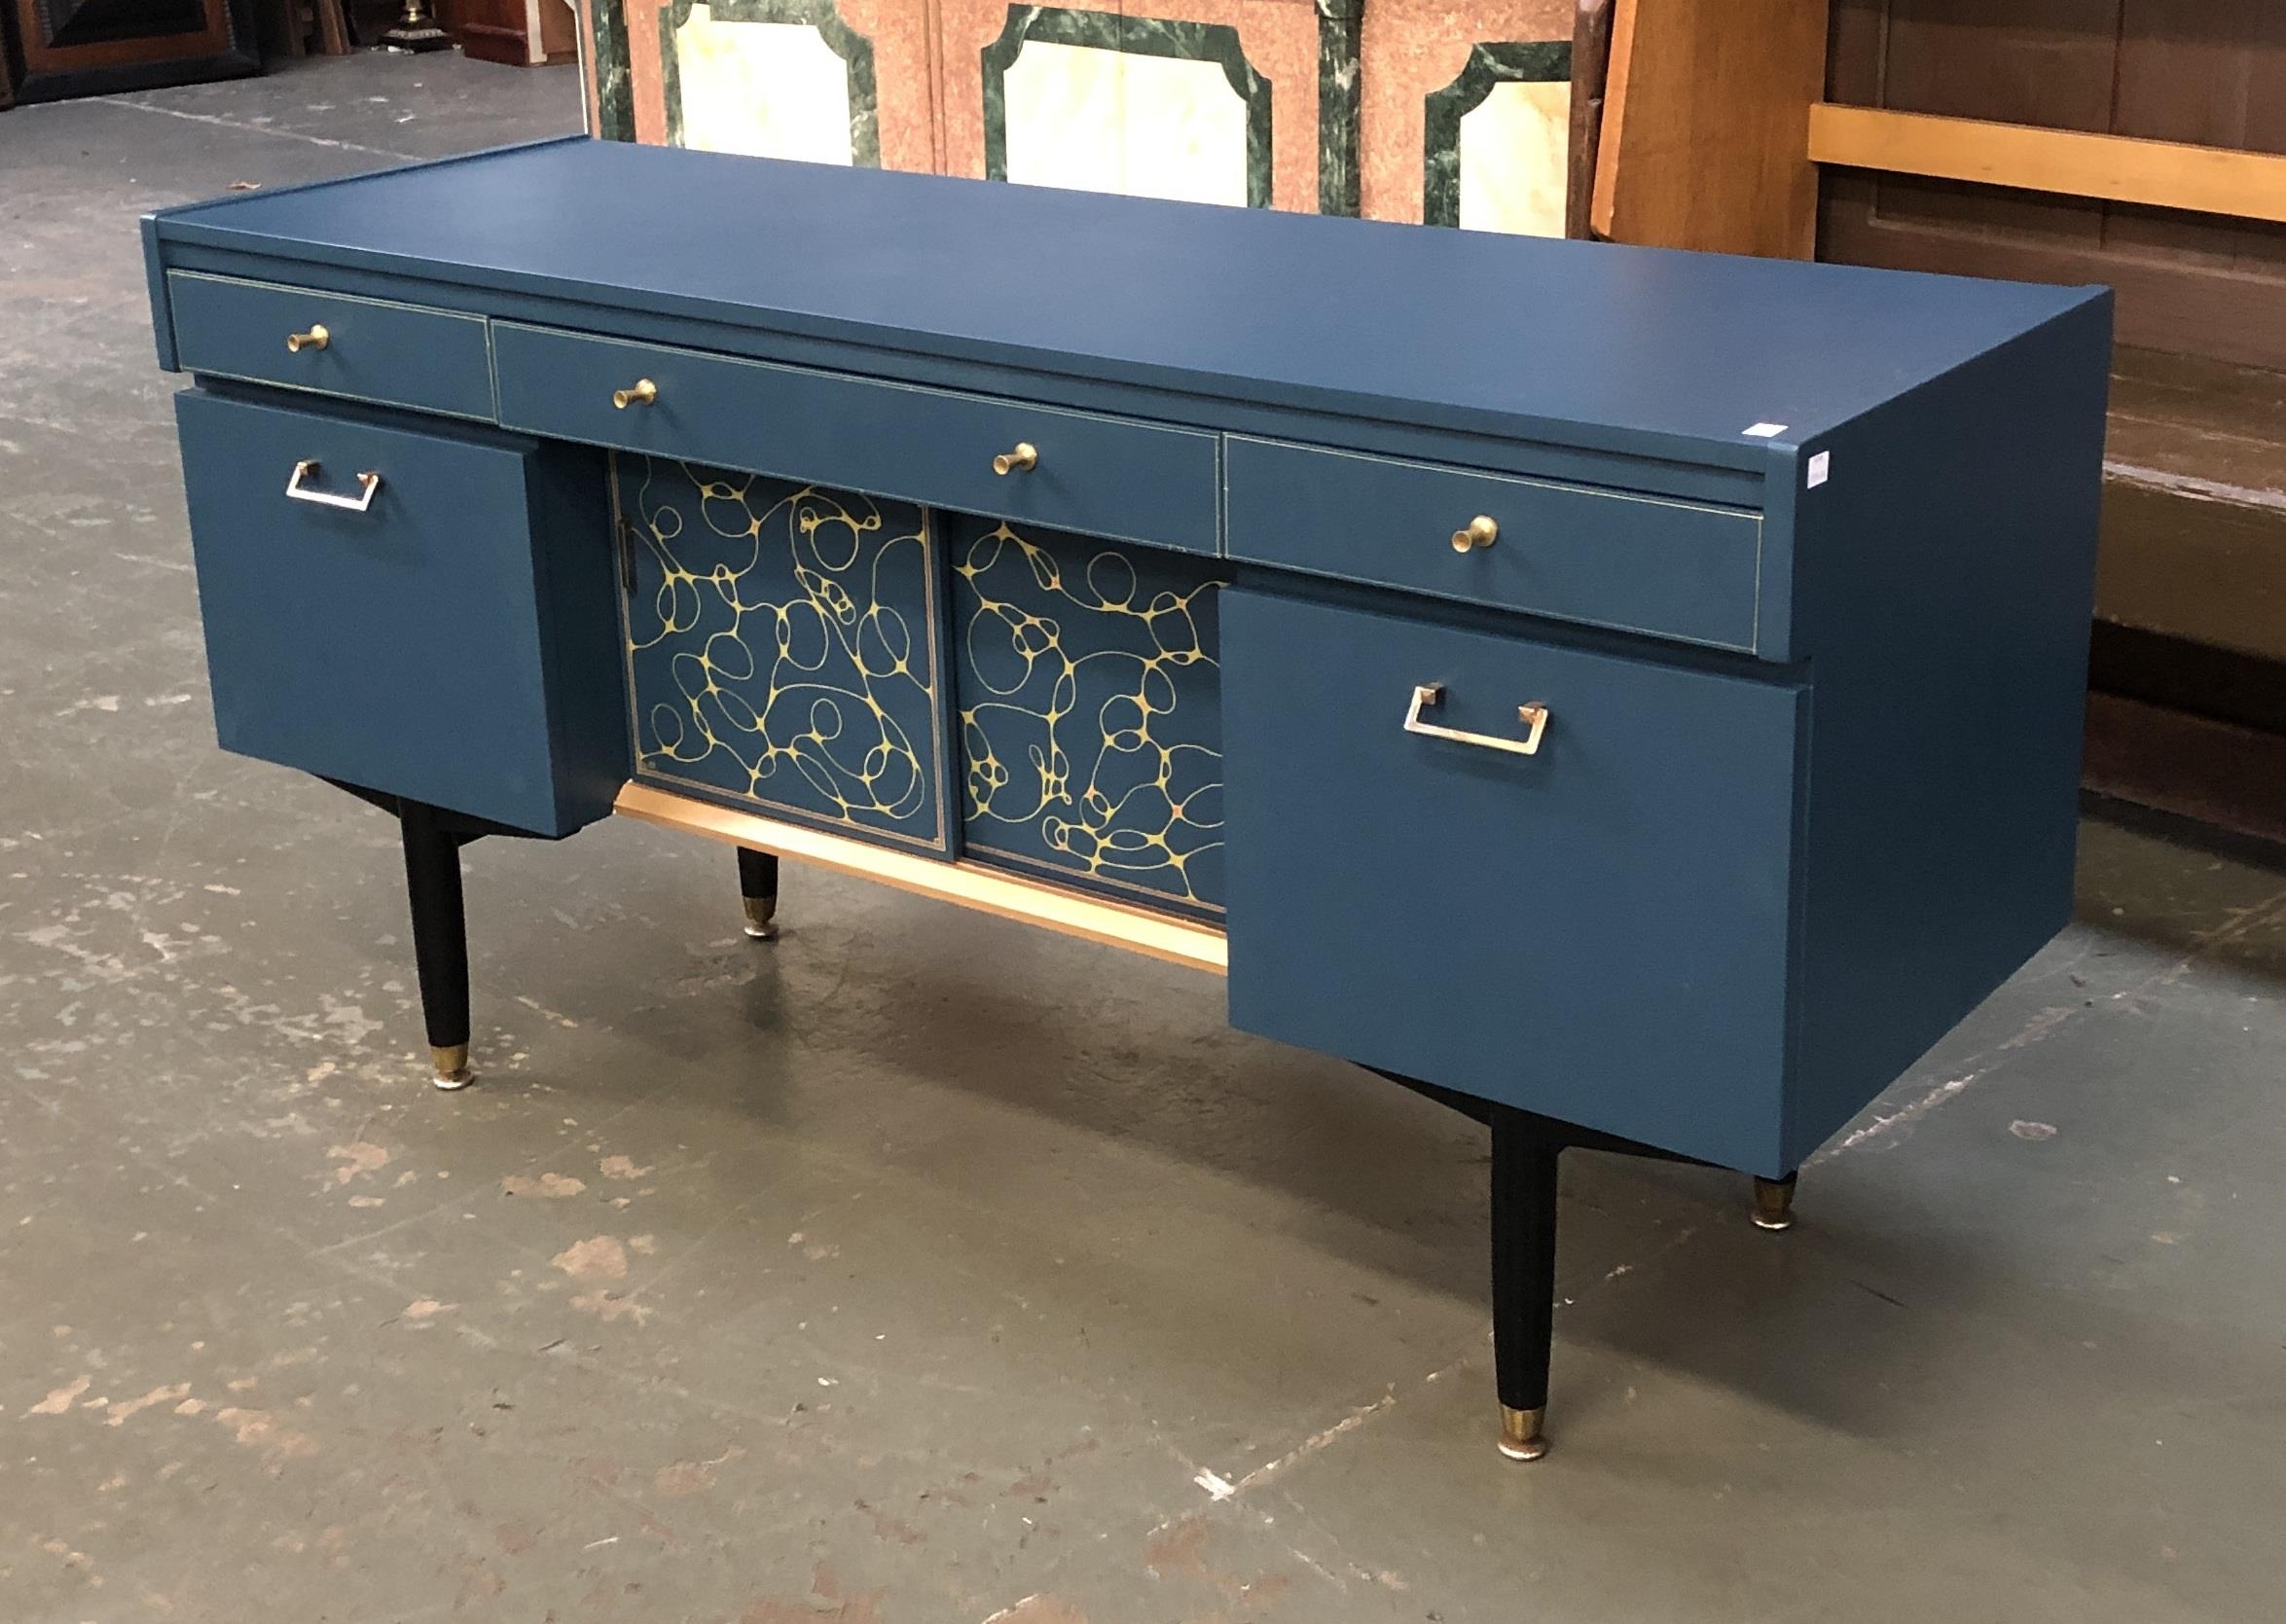 Interior design interest: A mid century Nathan sideboard, painted in a dark blue with gilt